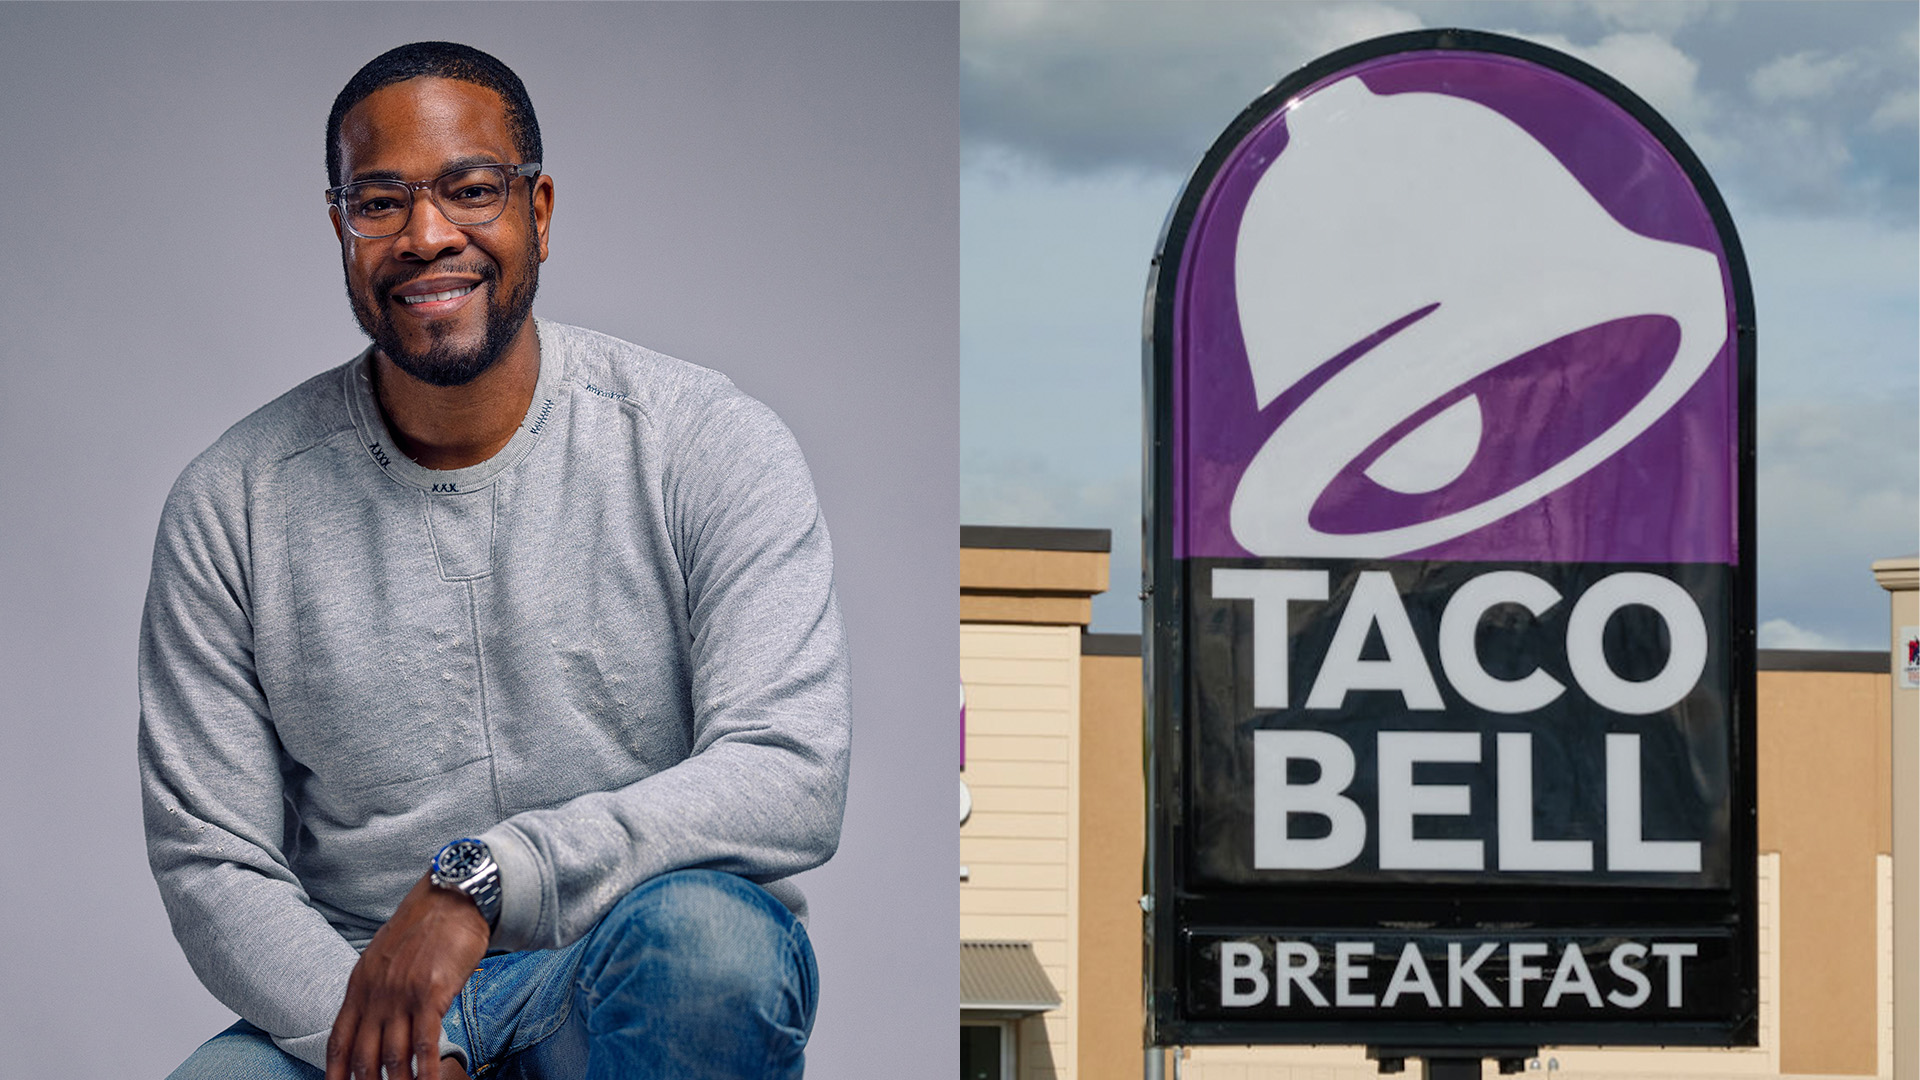 Taco Bell Announces Sean Tresvant As Its New CEO, Becoming The First Black Person In The Role